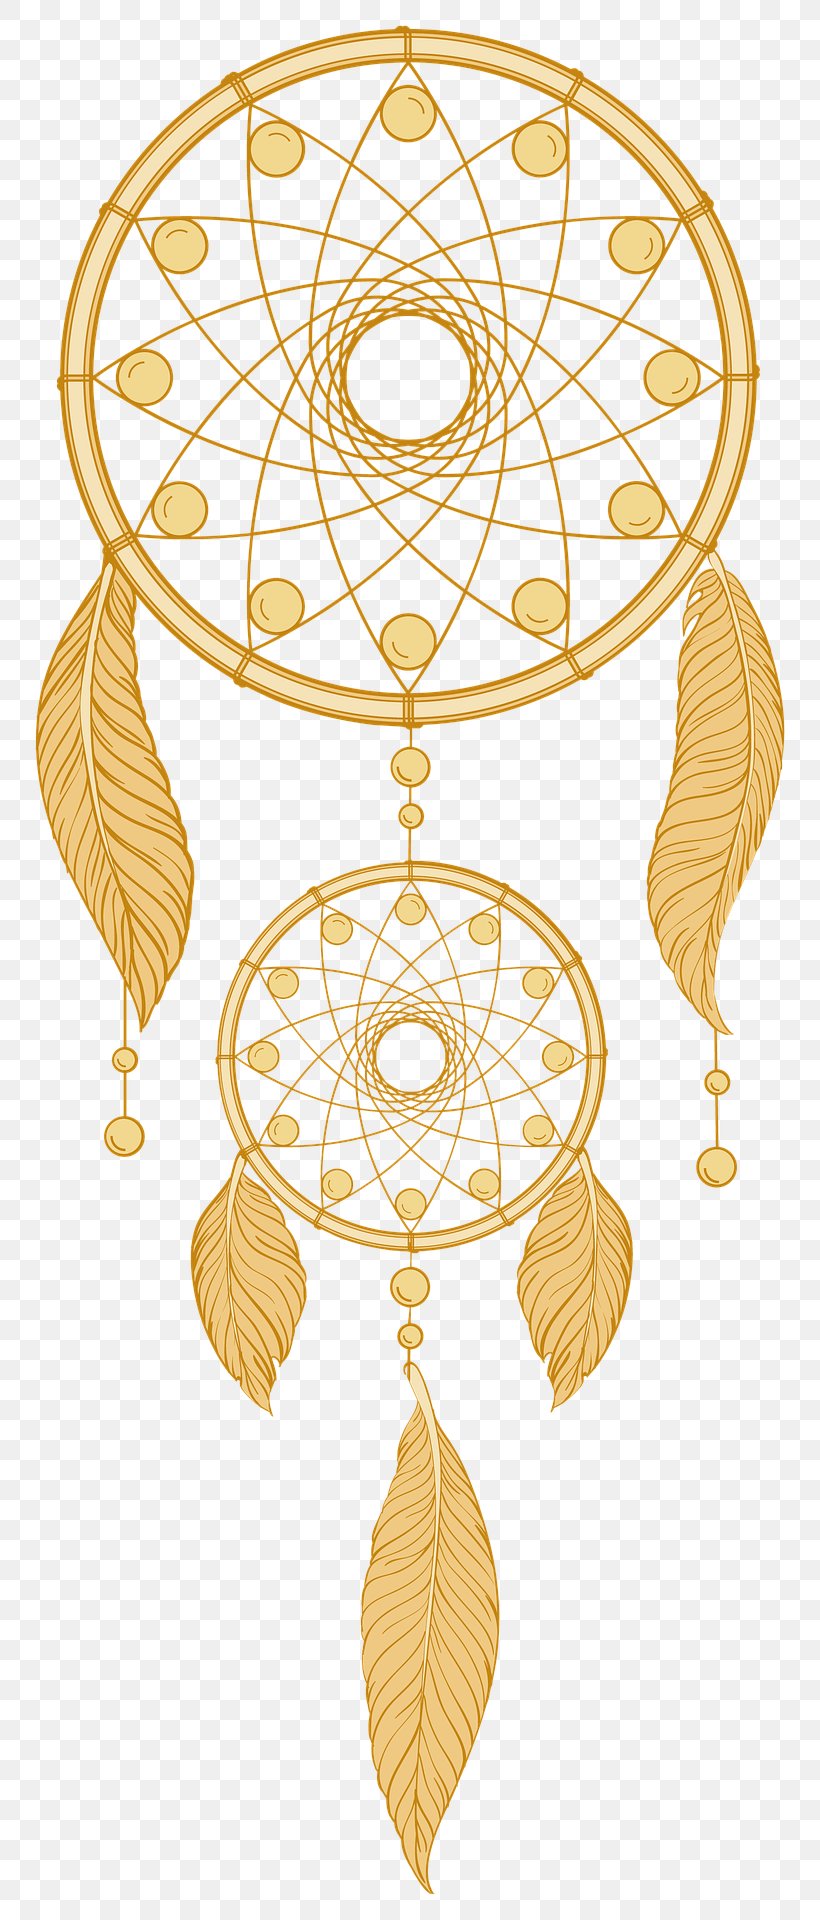 Dreamcatcher Native Americans In The United States Hinduism Medicine Wheel, PNG, 796x1920px, Dreamcatcher, Body Jewelry, Dream, Feather, Gold Download Free